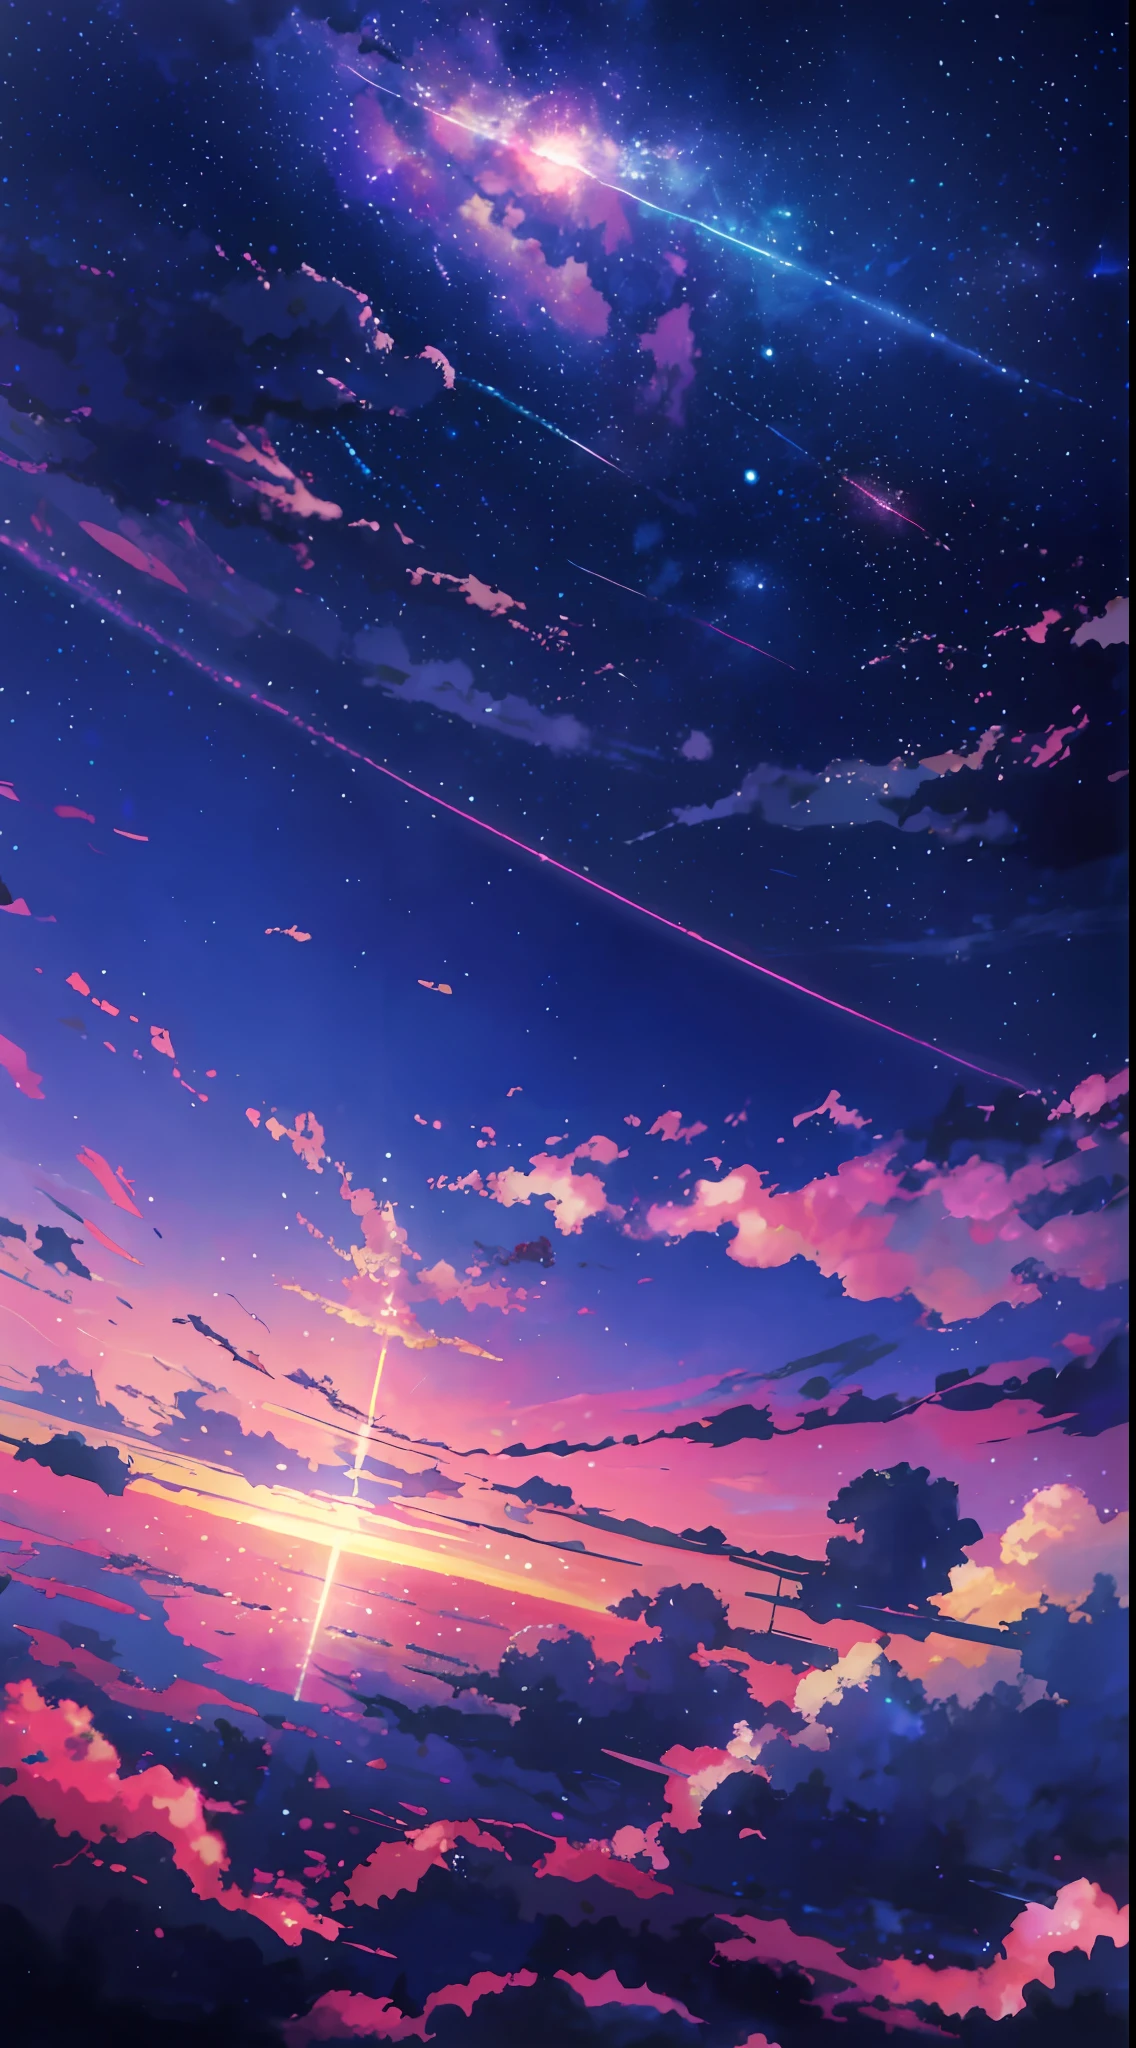 anime - style scene of a beautiful sky with a star and a planet, cosmic skies. by makoto shinkai, anime art wallpaper 4k, anime art wallpaper 4 k, anime art wallpaper 8 k, anime wallpaper 4k, anime wallpaper 4 k, 4k anime wallpaper, anime sky, amazing wallpaper, anime background, heaven planet in background, anime background art